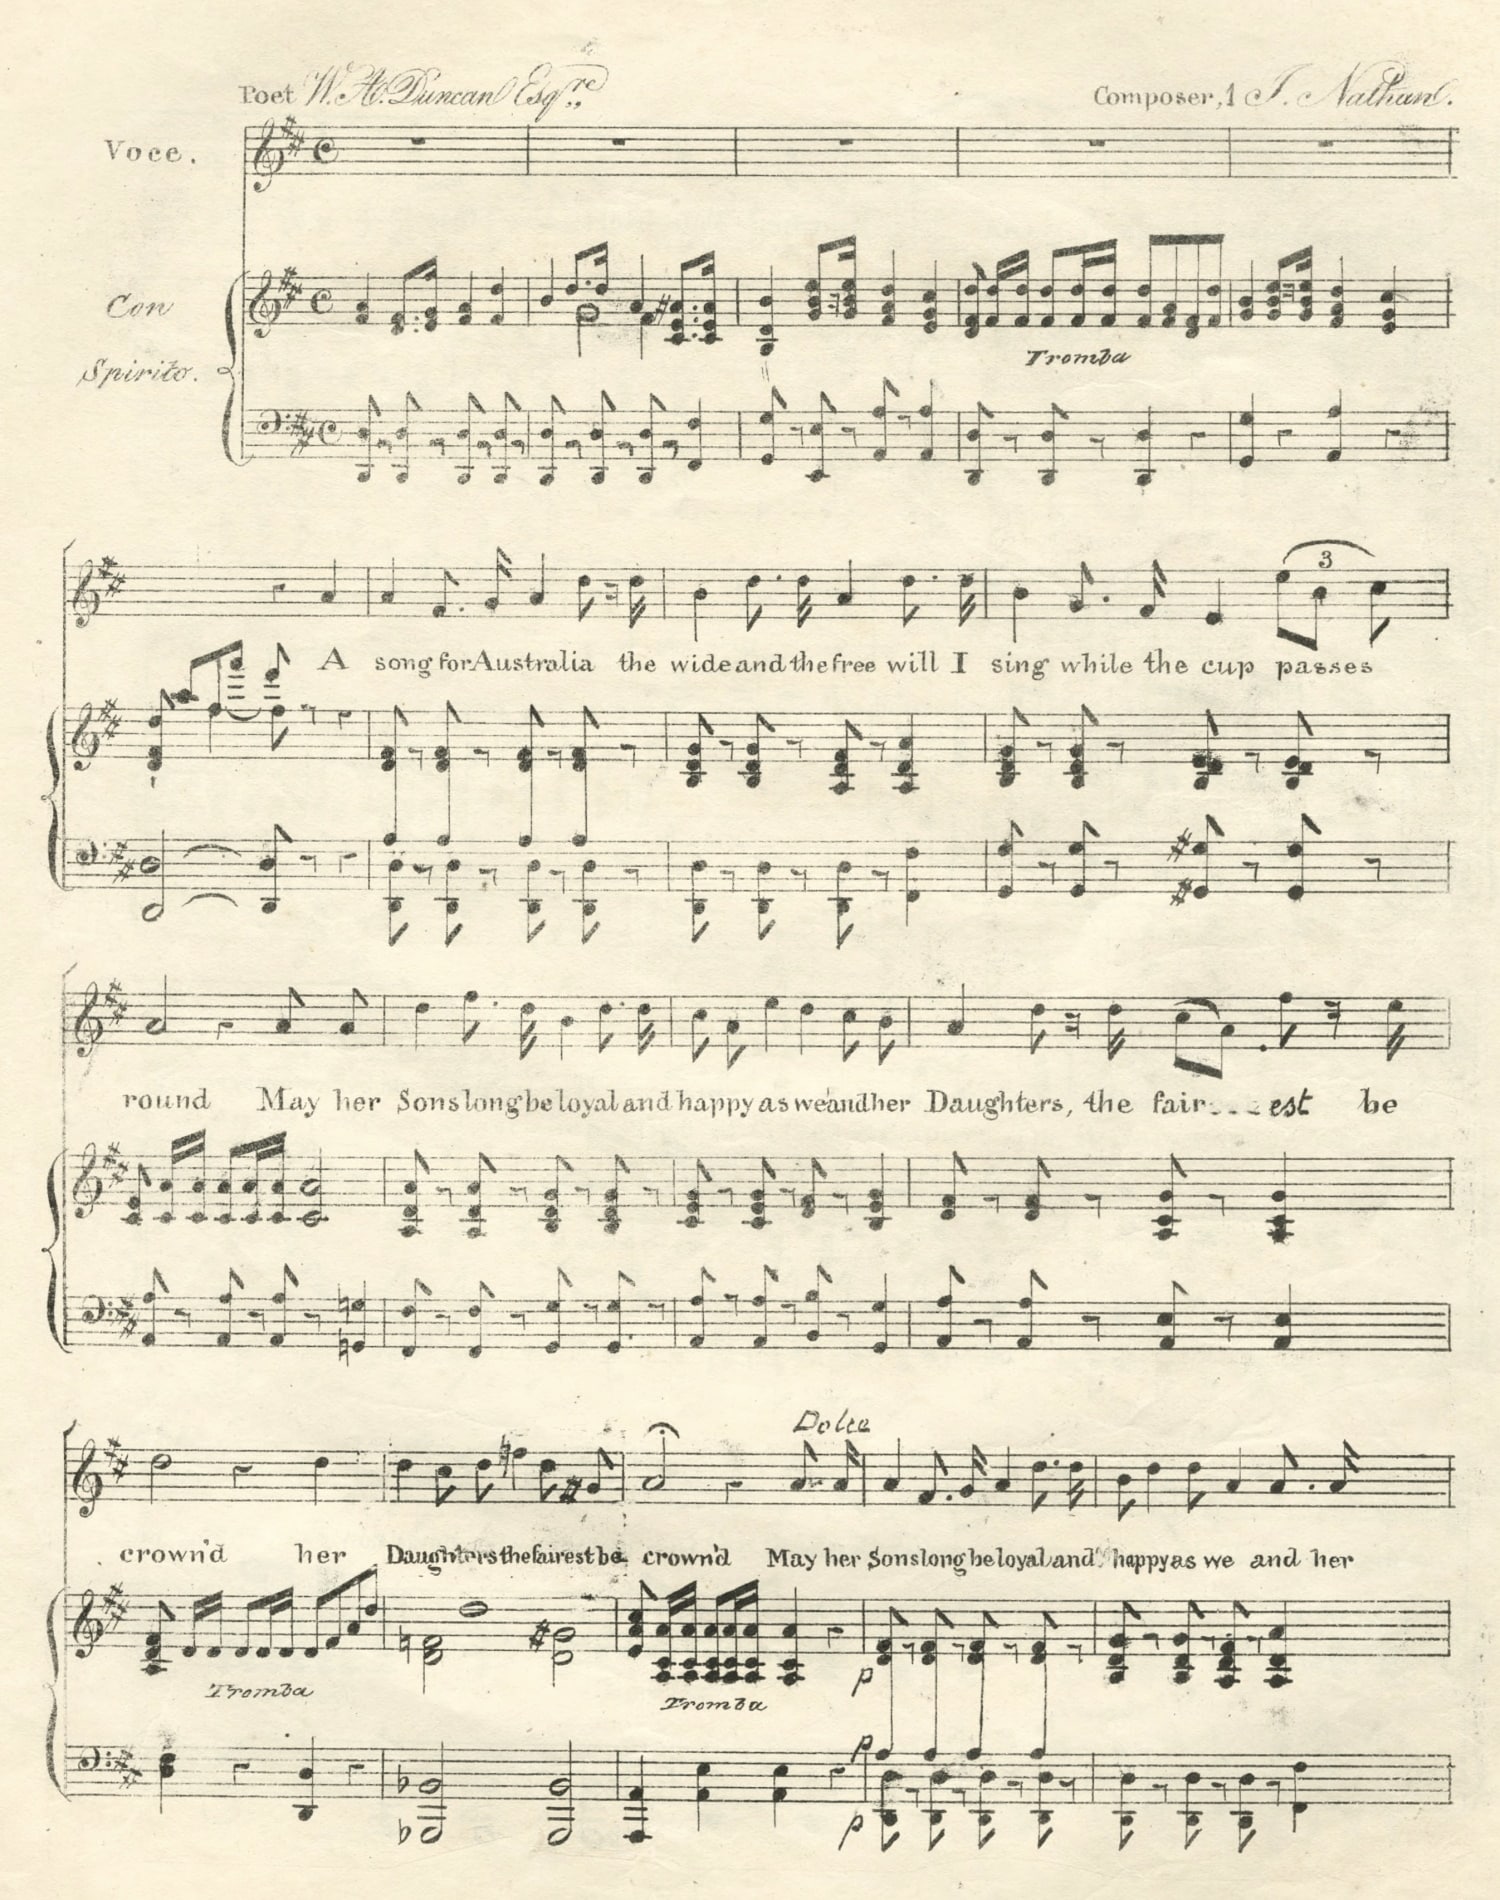 Australia the wide and the free; words by W. A. Duncan, music by Isaac Nathan, December 1842